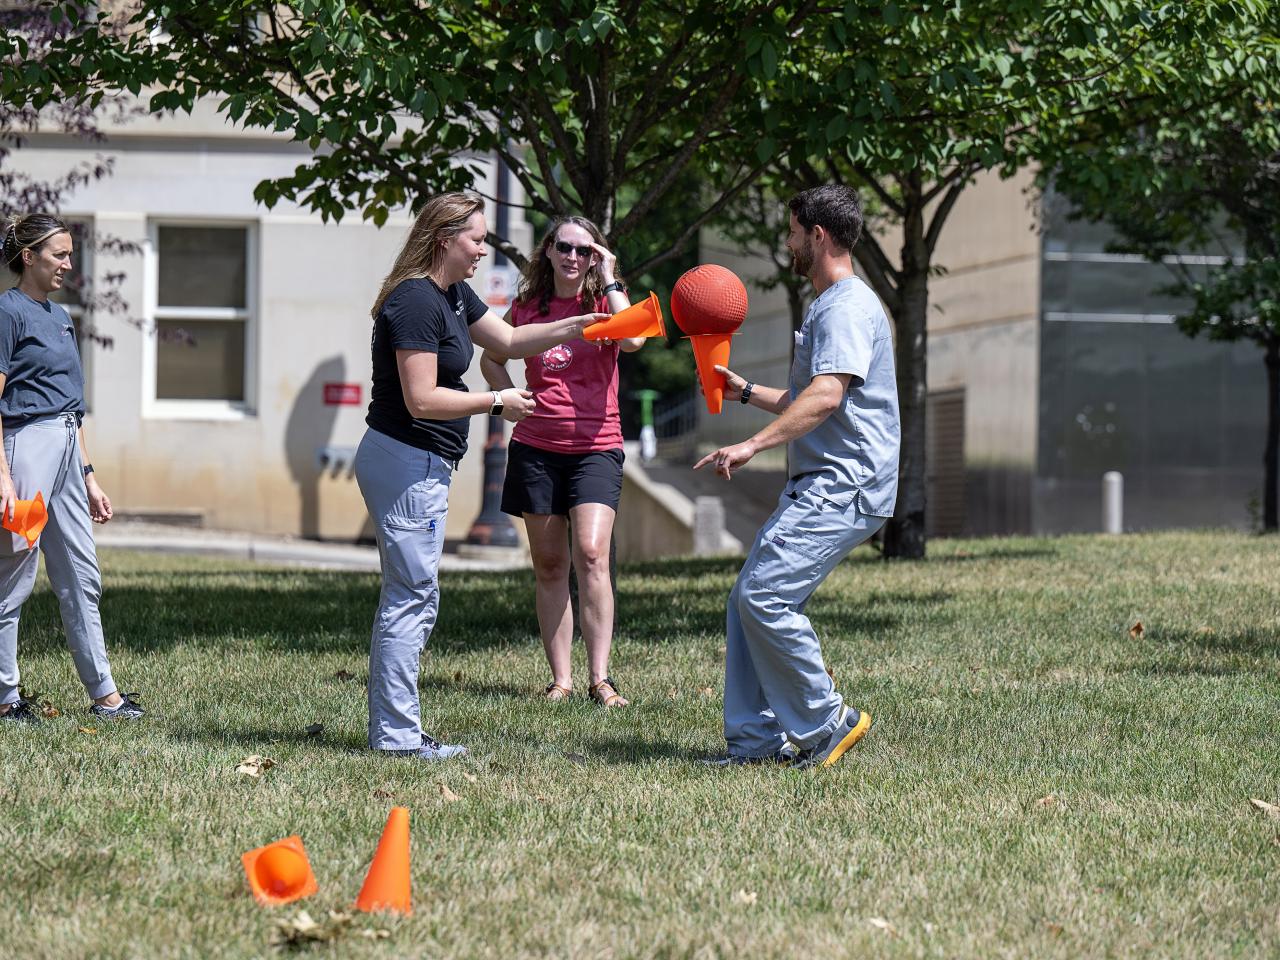 Team members participating in a relay race